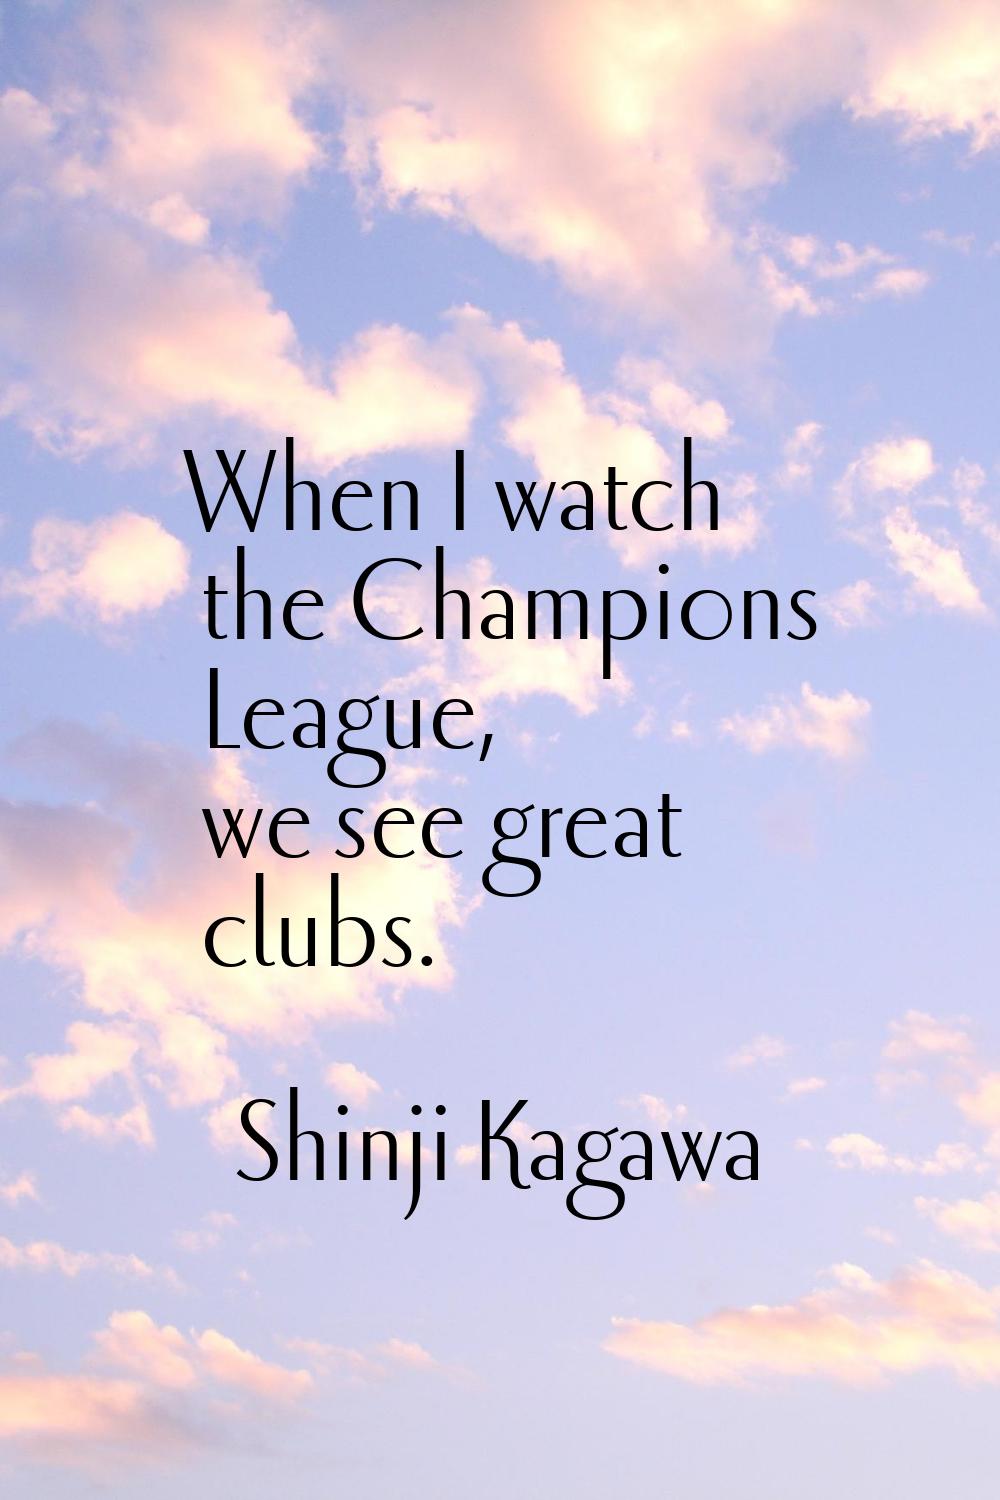 When I watch the Champions League, we see great clubs.